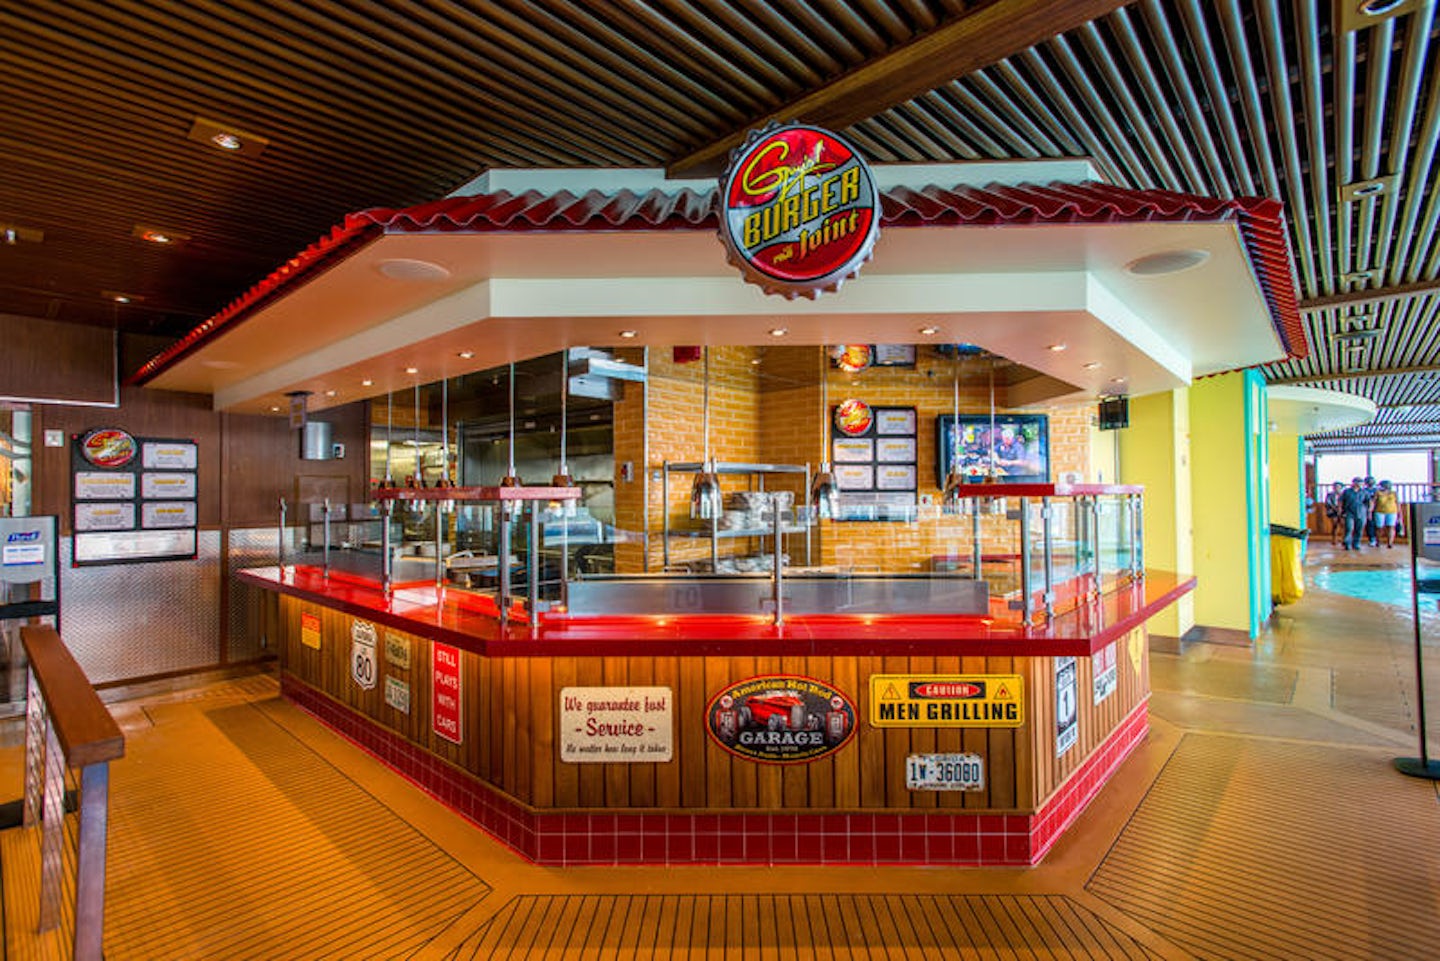 Guy's Burger Joint on Carnival Vista (Photo: Cruise Critic)